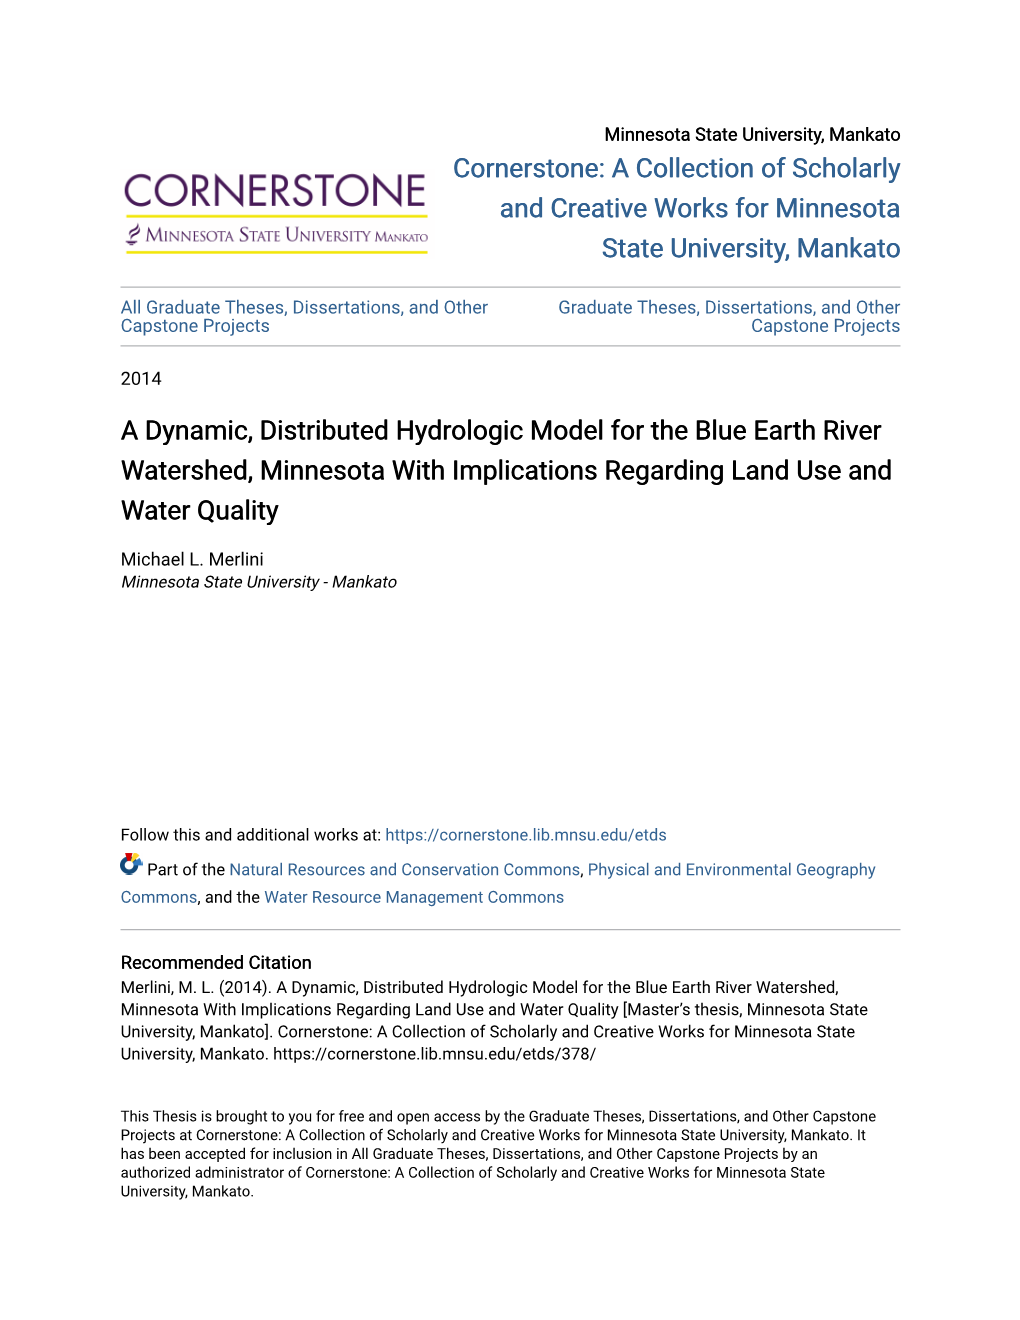 A Dynamic, Distributed Hydrologic Model for the Blue Earth River Watershed, Minnesota with Implications Regarding Land Use and Water Quality